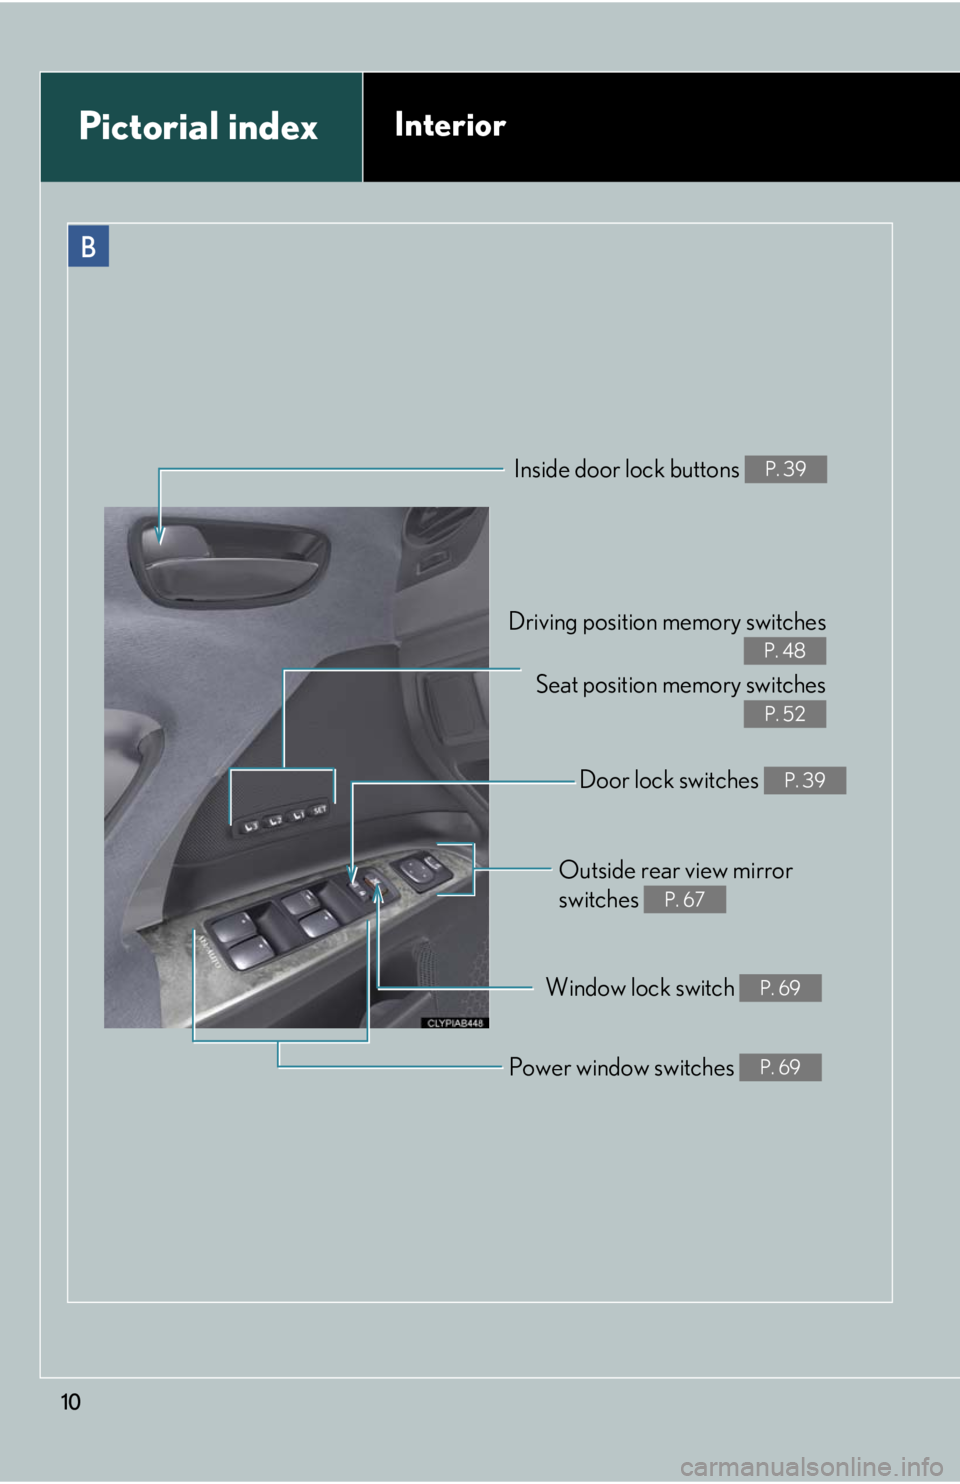 Lexus IS F 2010  Audio/video System / LEXUS 2010 IS F OWNERS MANUAL (OM53A25U) 10
B
Driving position memory switches
Seat position memory switches
P. 48
P. 52
Inside door lock buttons P. 39
Outside rear view mirror 
switches 
P. 67
Window lock switch P. 69
Power window switches 